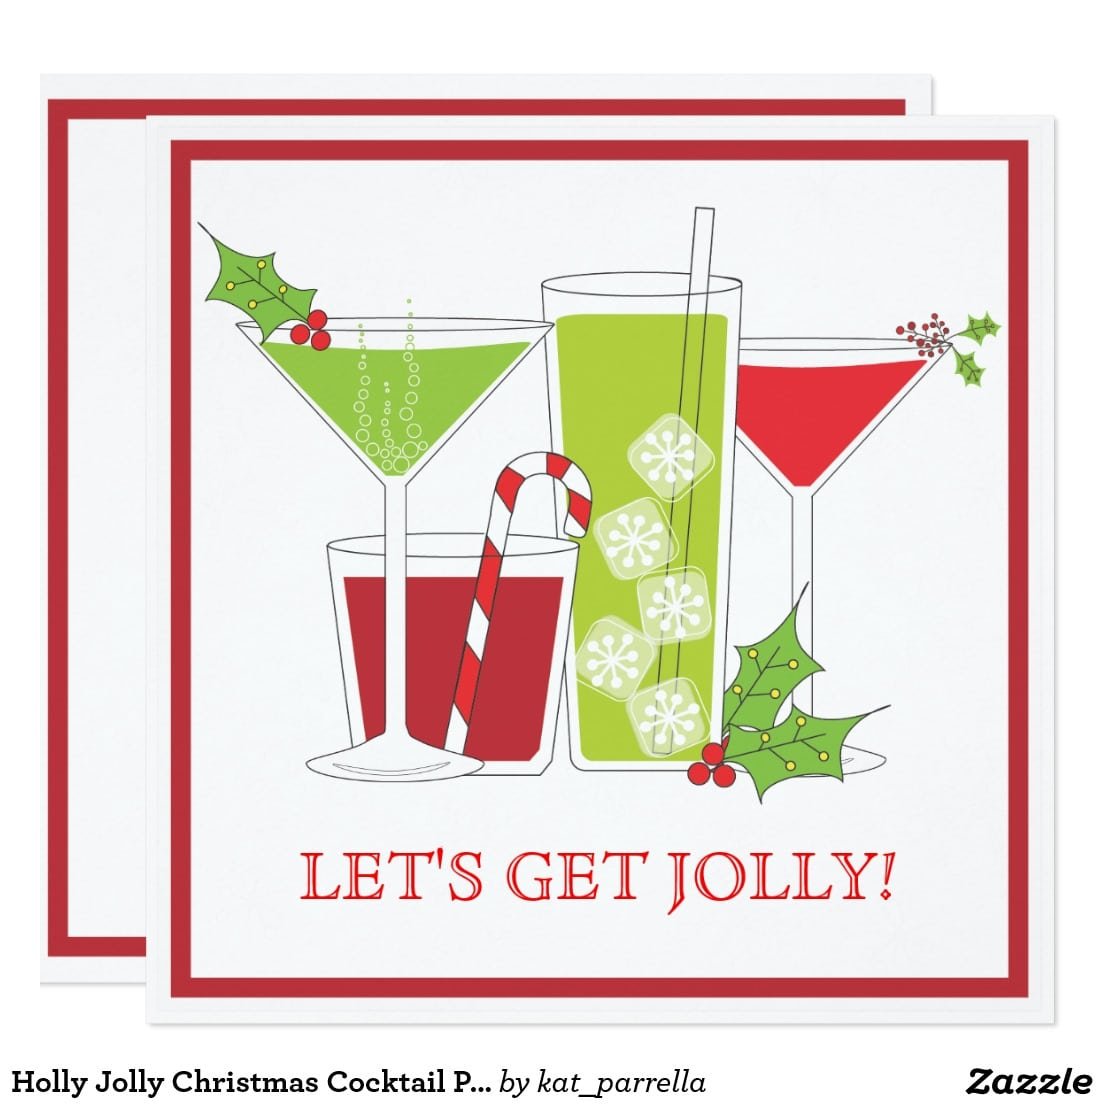 Holly Jolly Christmas Cocktail Party Invitation